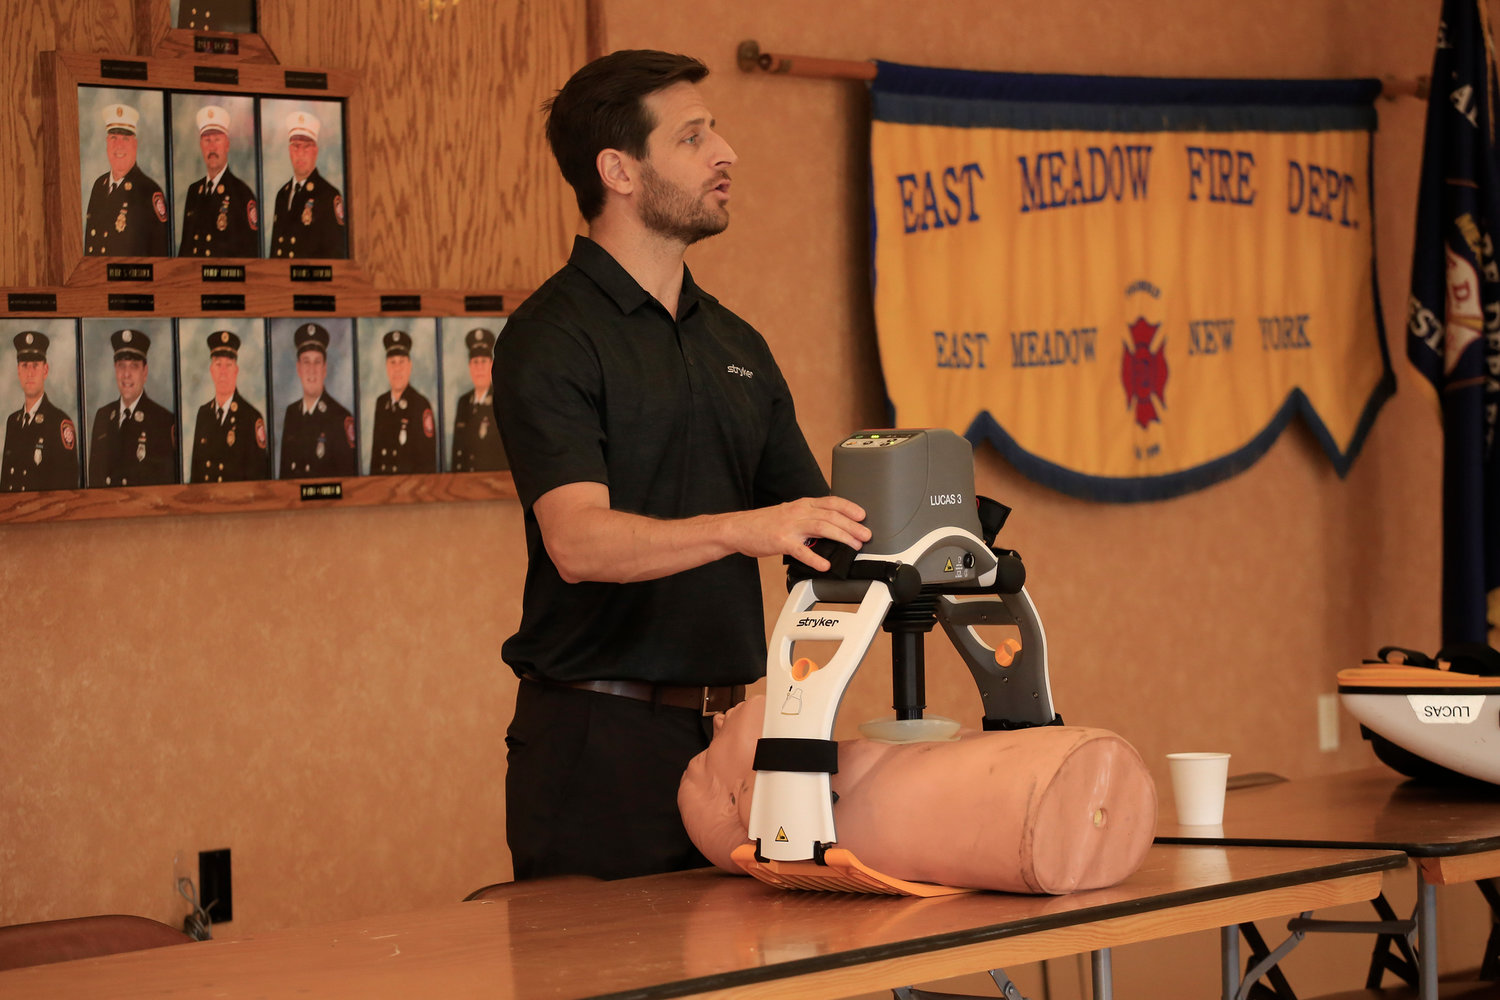 Ryan Pinnix, the Stryker rep, gives a refresher demo of the new CPR technology.